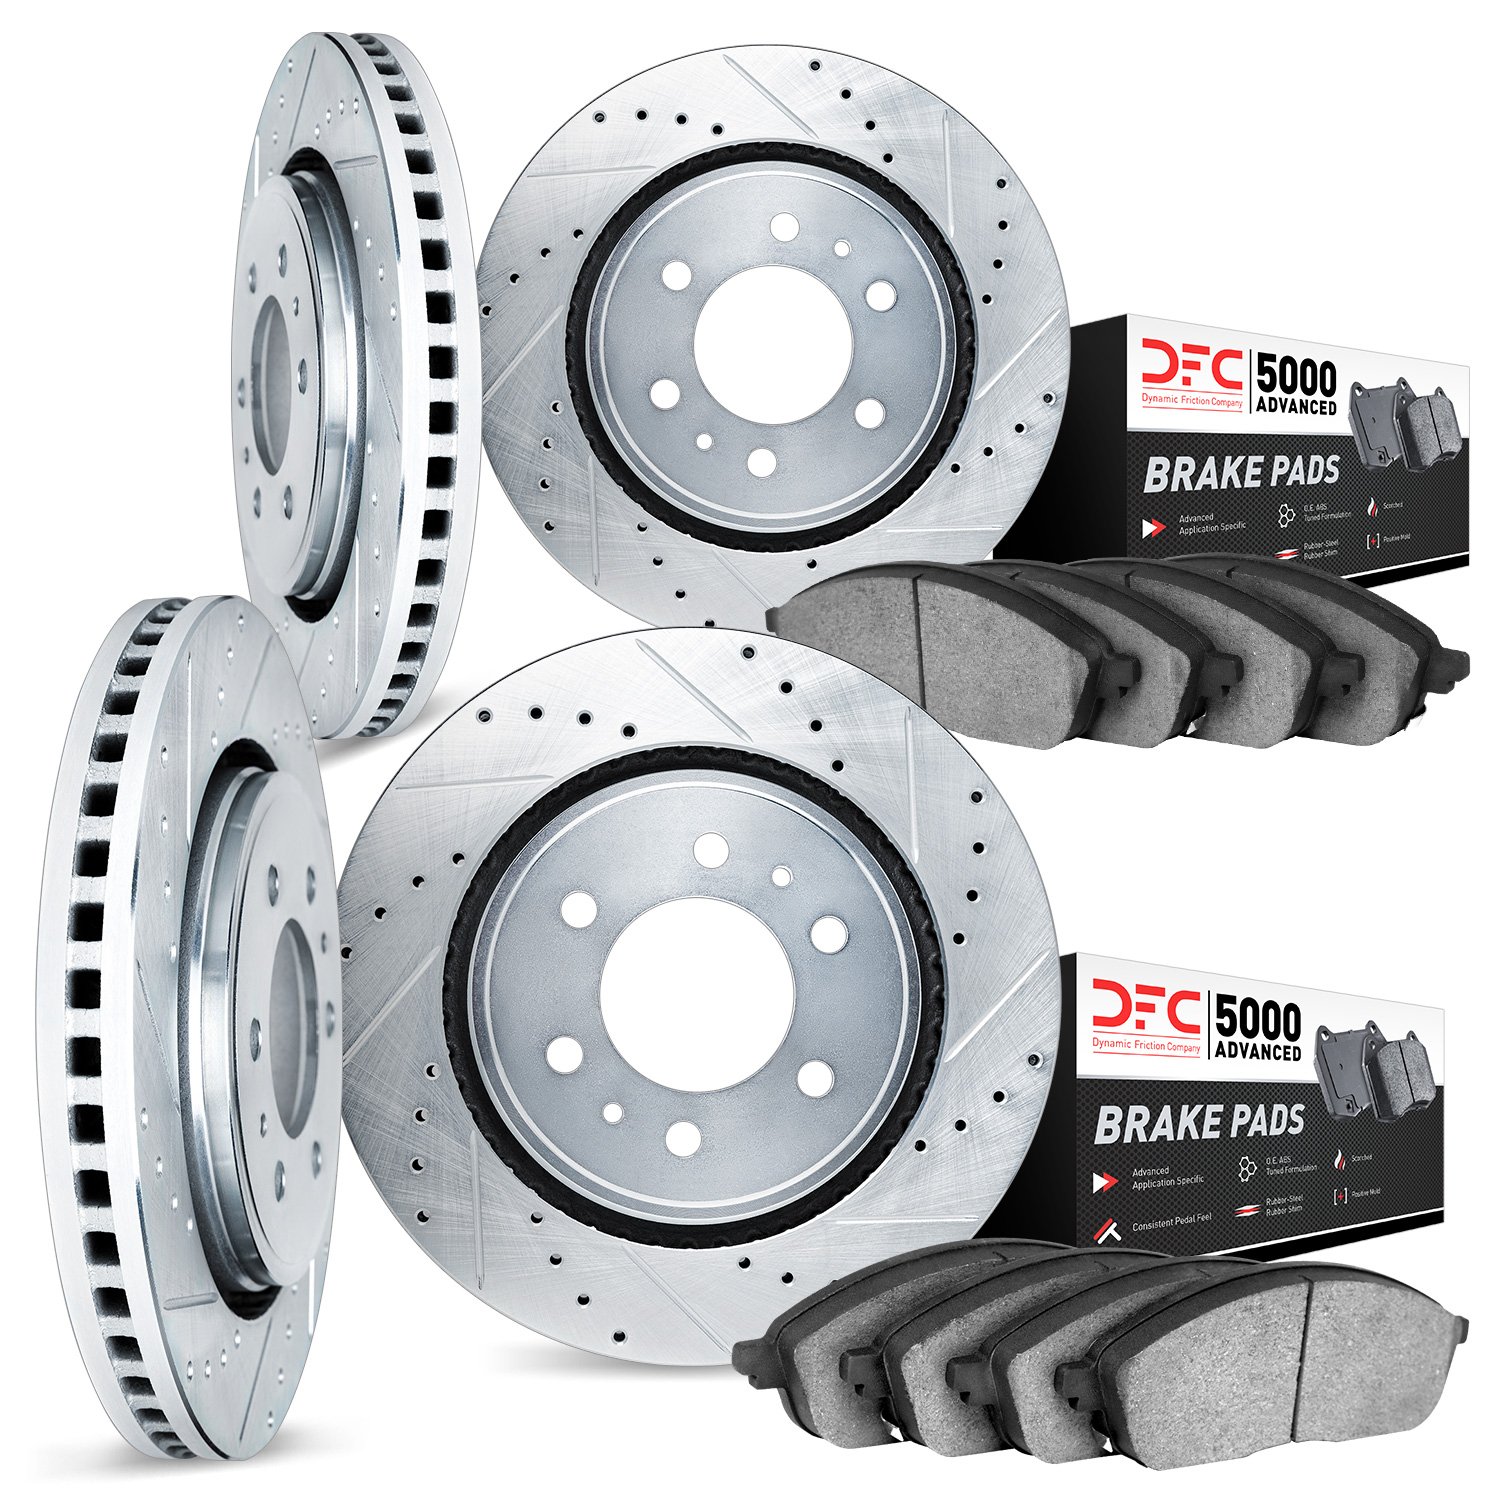 7504-48037 Drilled/Slotted Brake Rotors w/5000 Advanced Brake Pads Kit [Silver], 2006-2009 GM, Position: Front and Rear